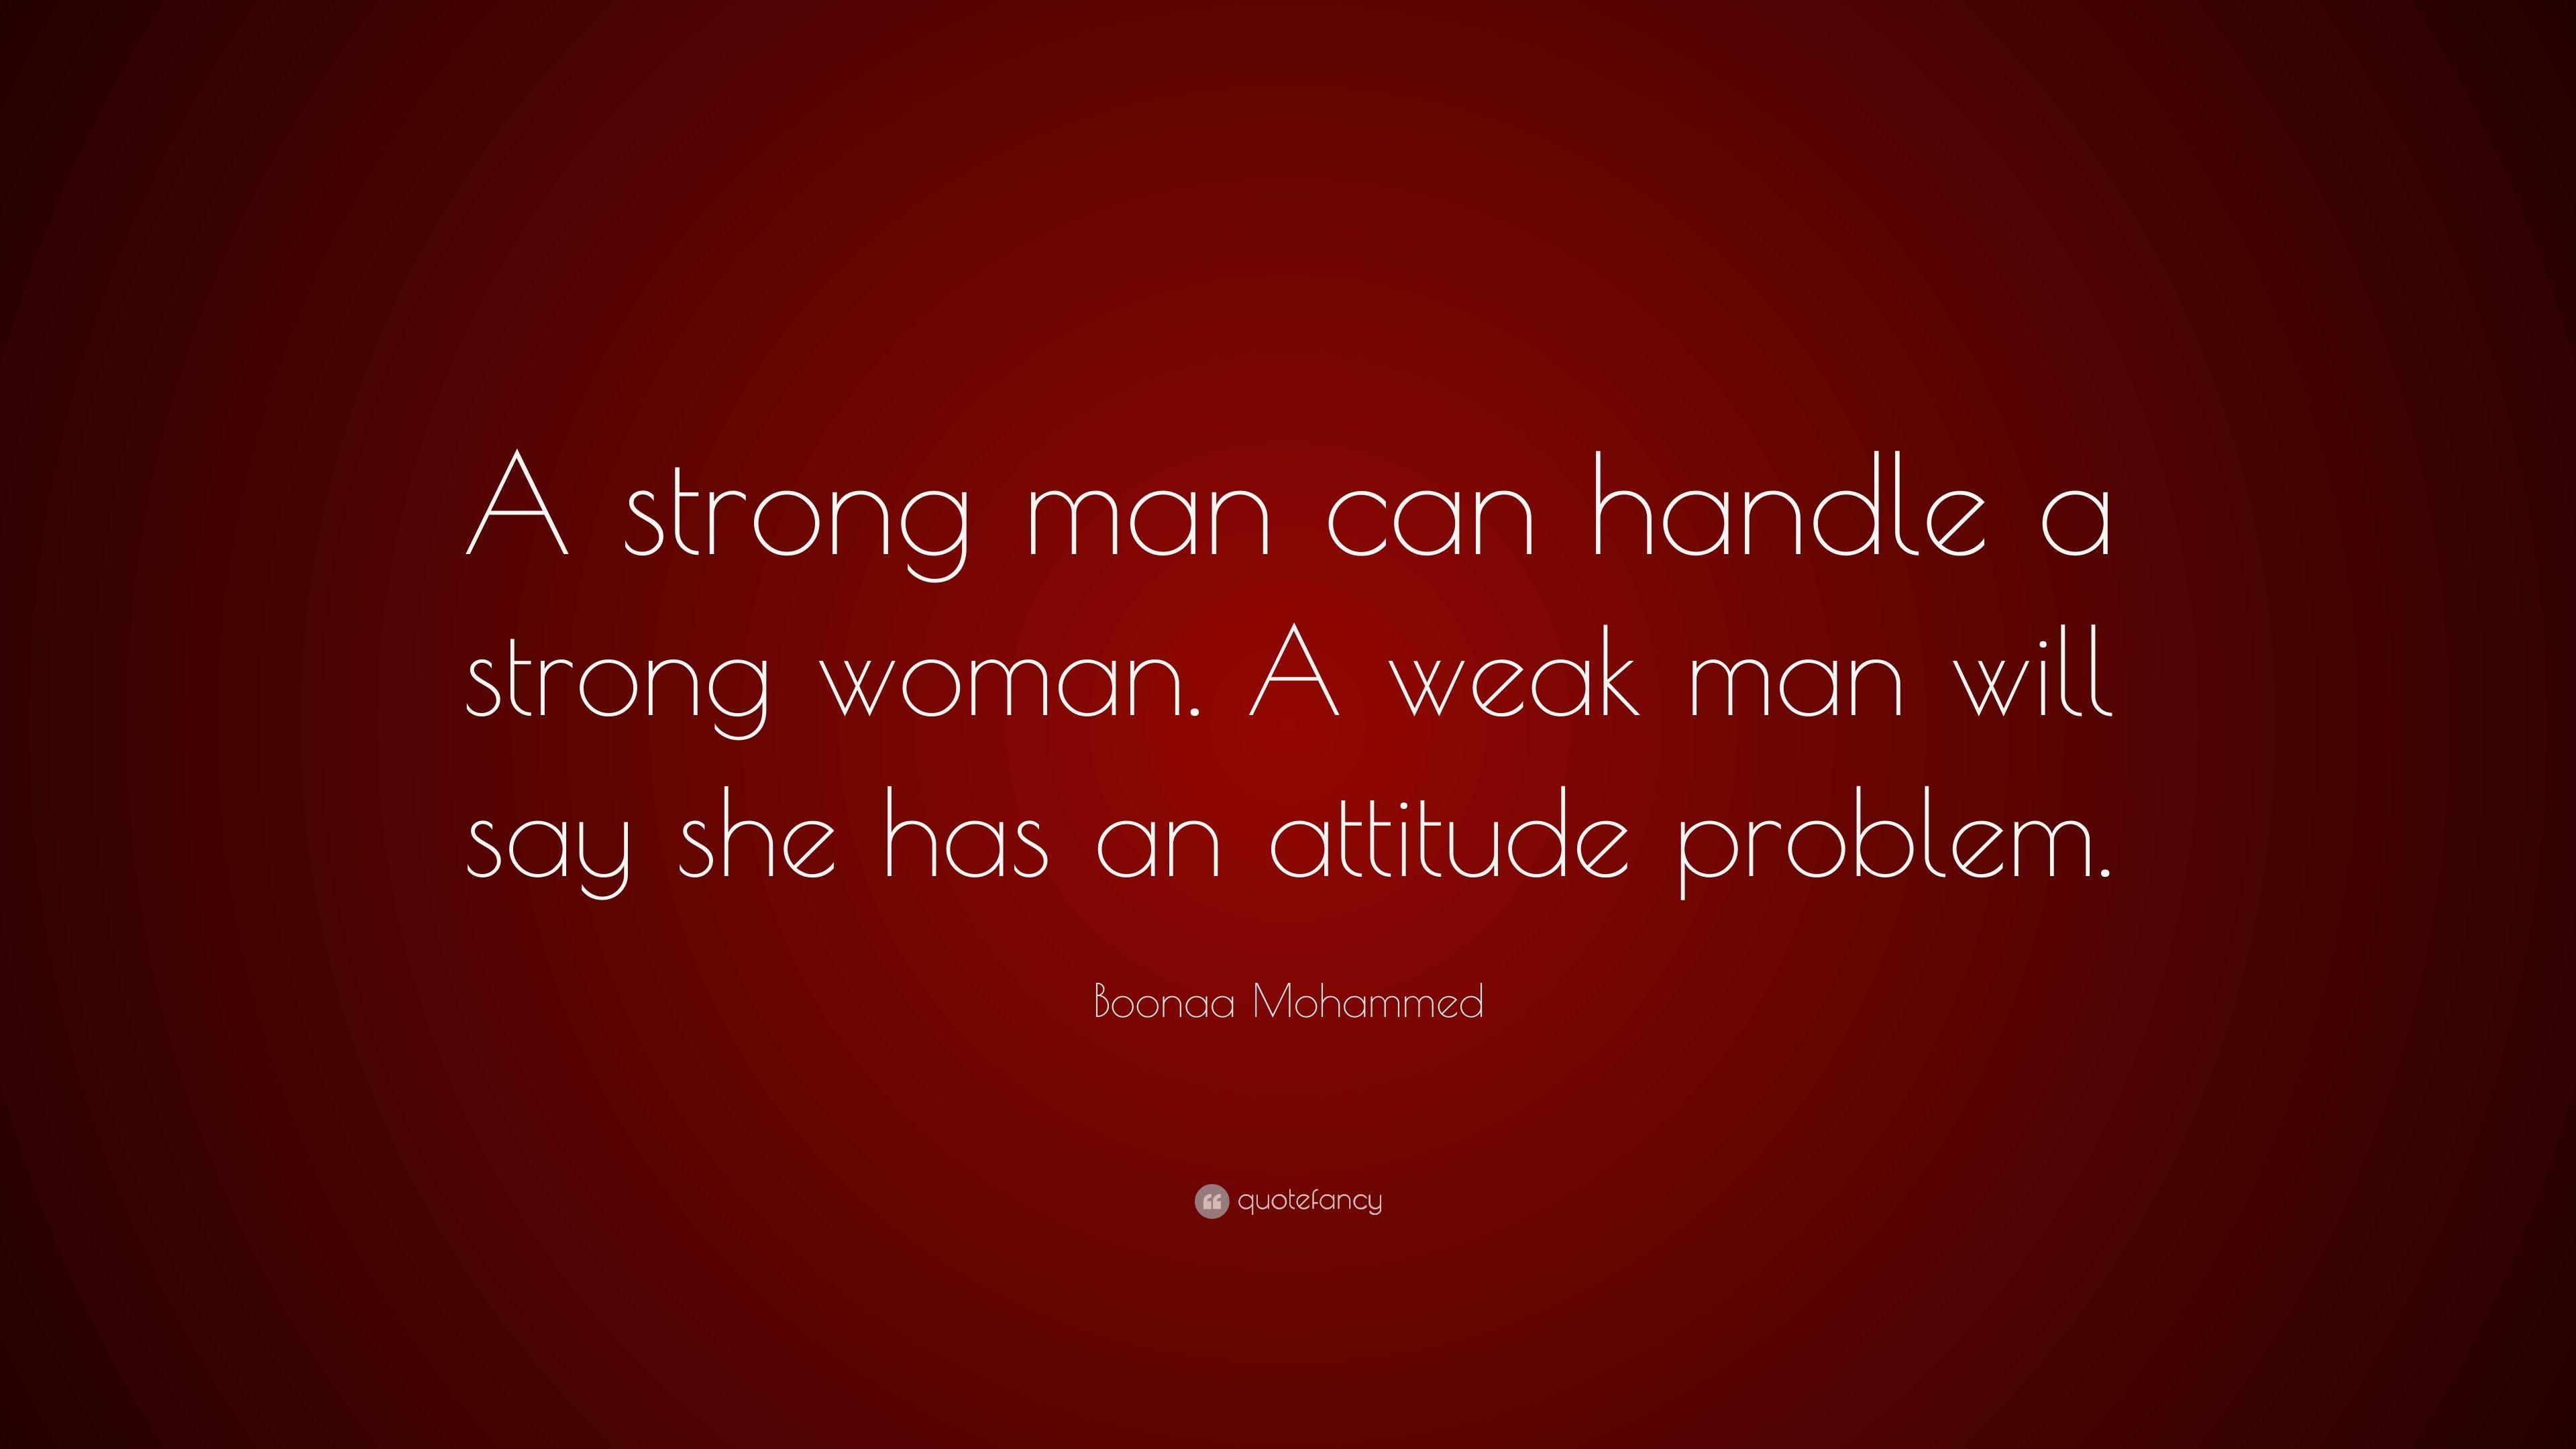 Boonaa Mohammed Quote: “A strong man can handle a strong woman. A